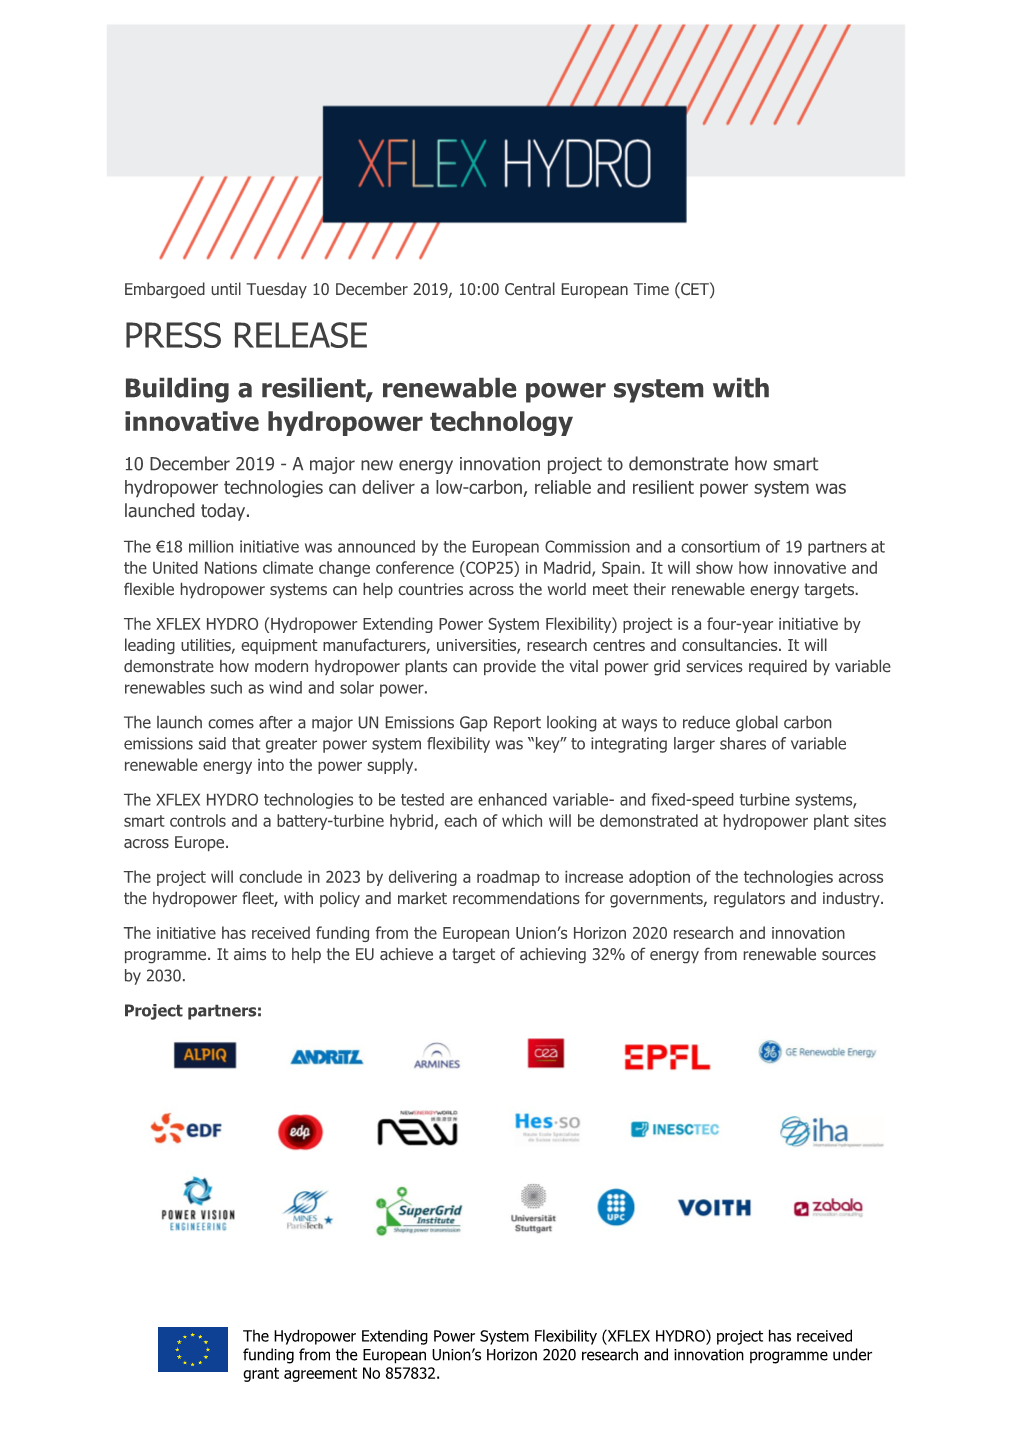 PRESS RELEASE Building a Resilient, Renewable Power System with Innovative Hydropower Technology